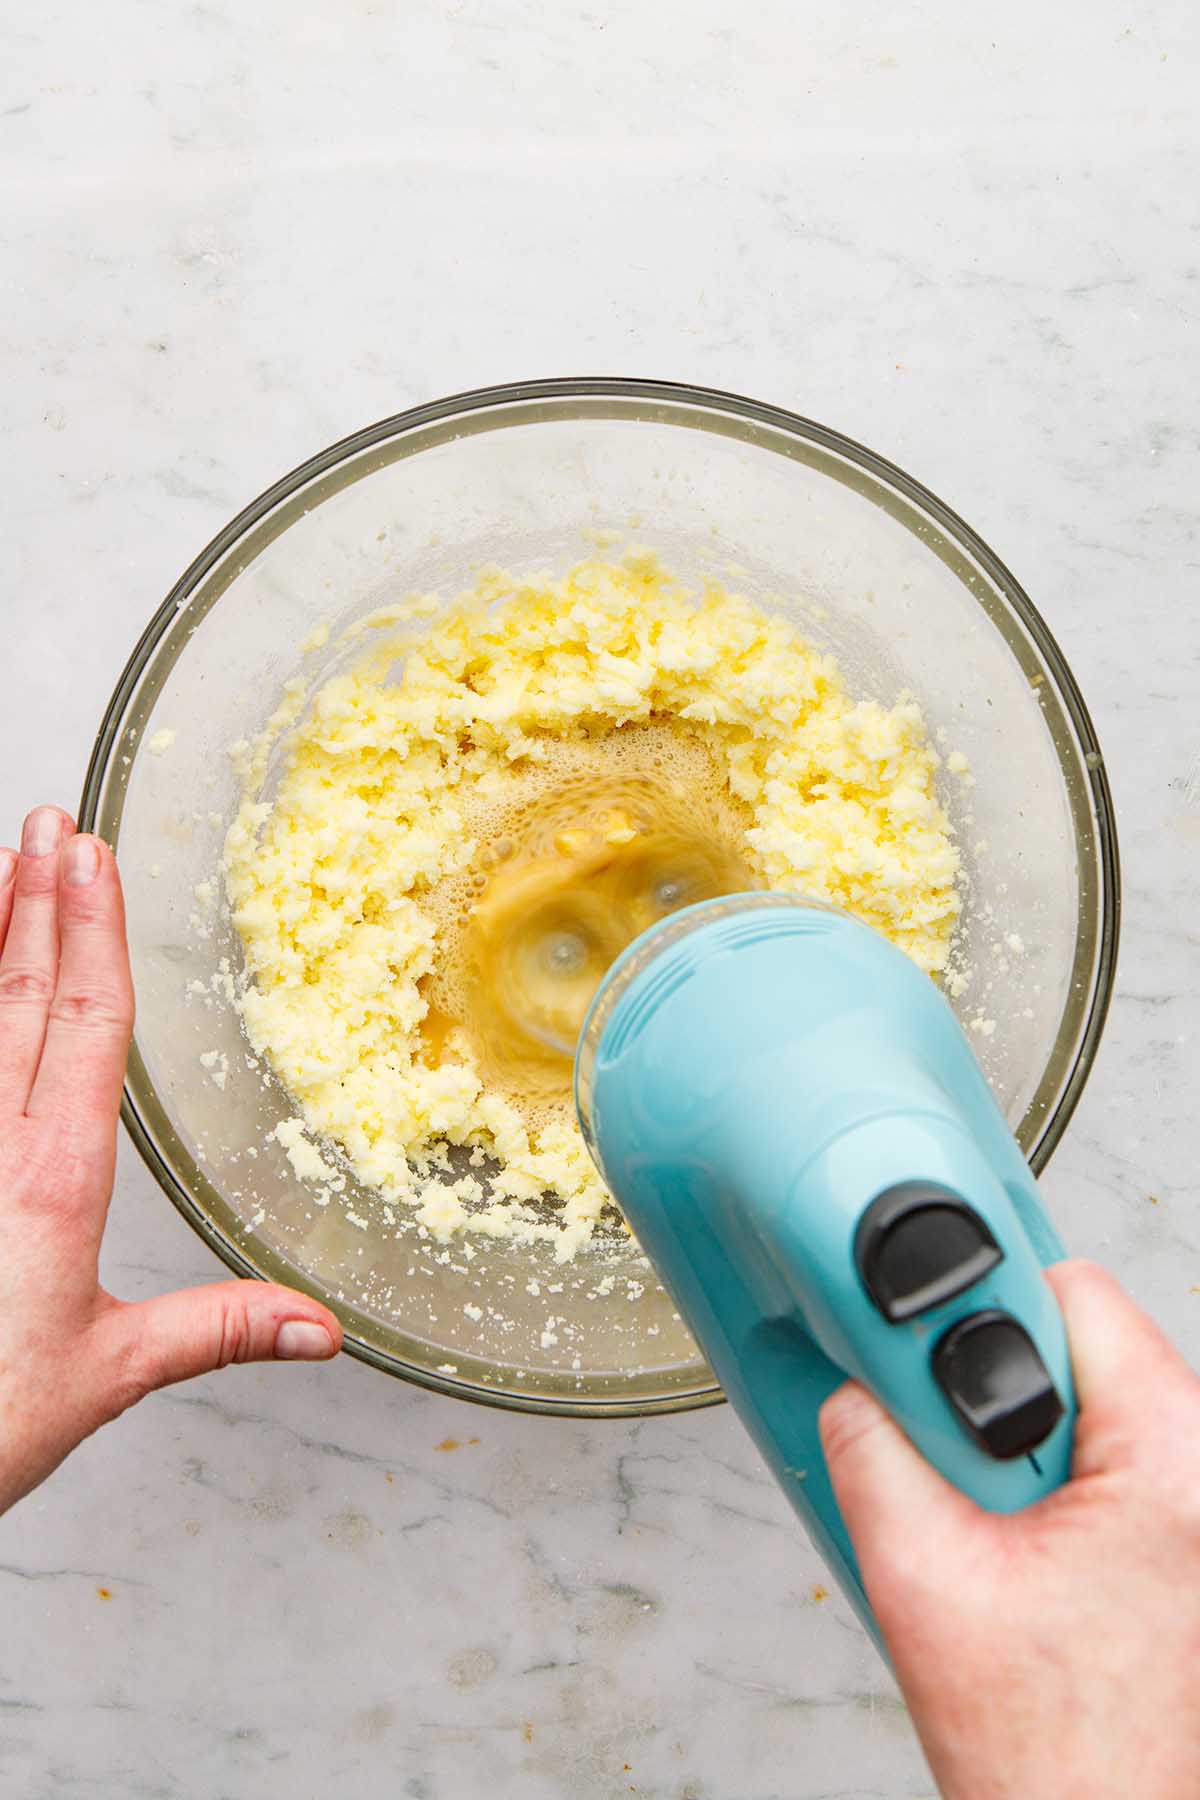 A hand using a hand mixer to mix egg mixture into wet cookie dough ingredients.